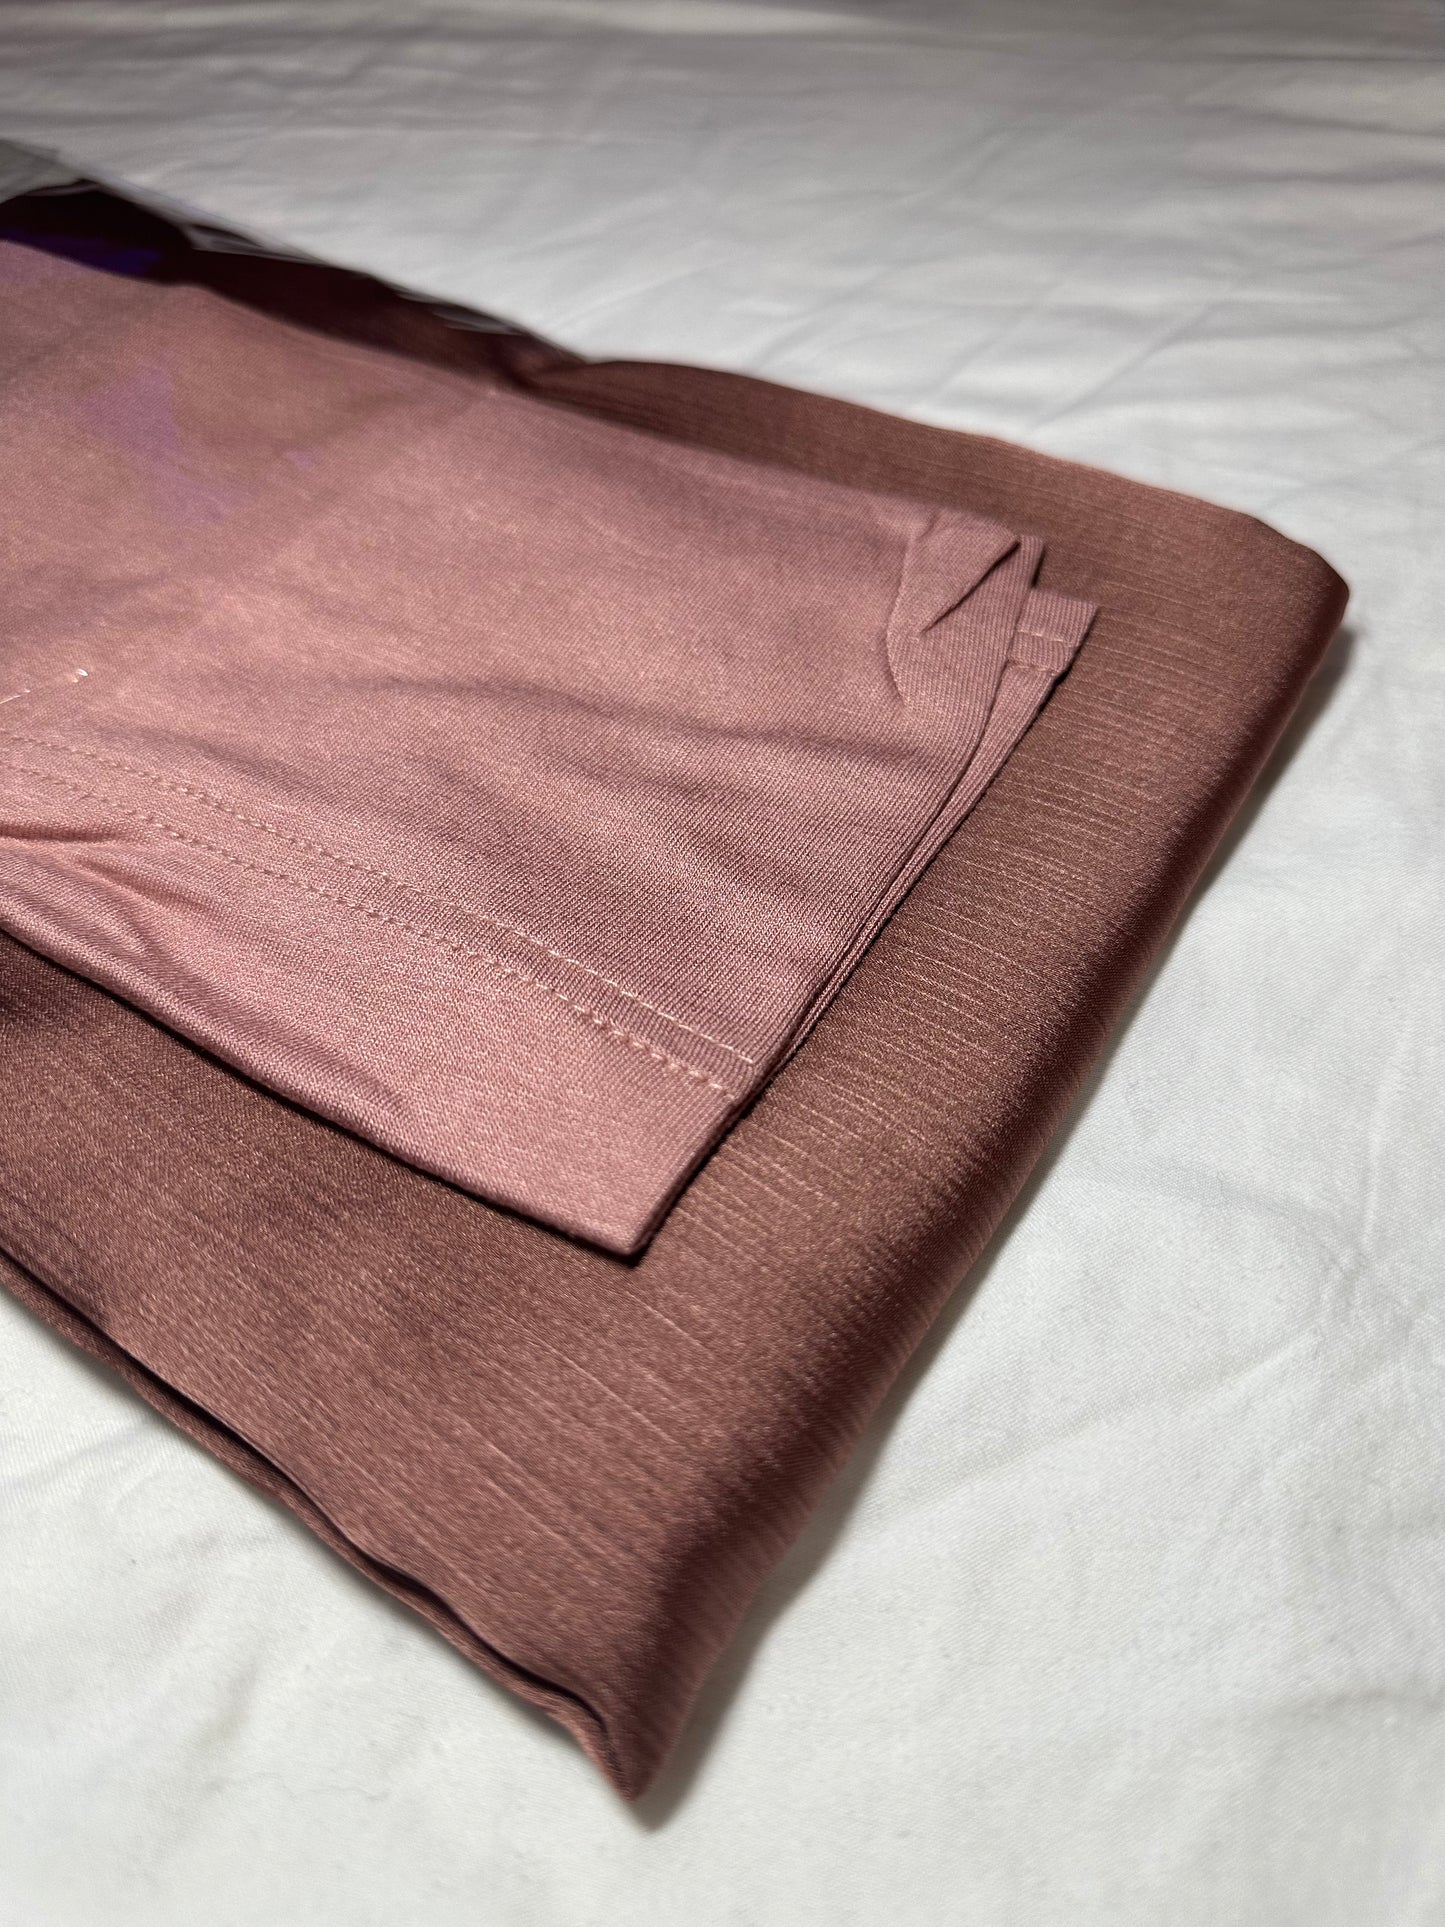 Textured Satin Hijabs with Matching undercaps